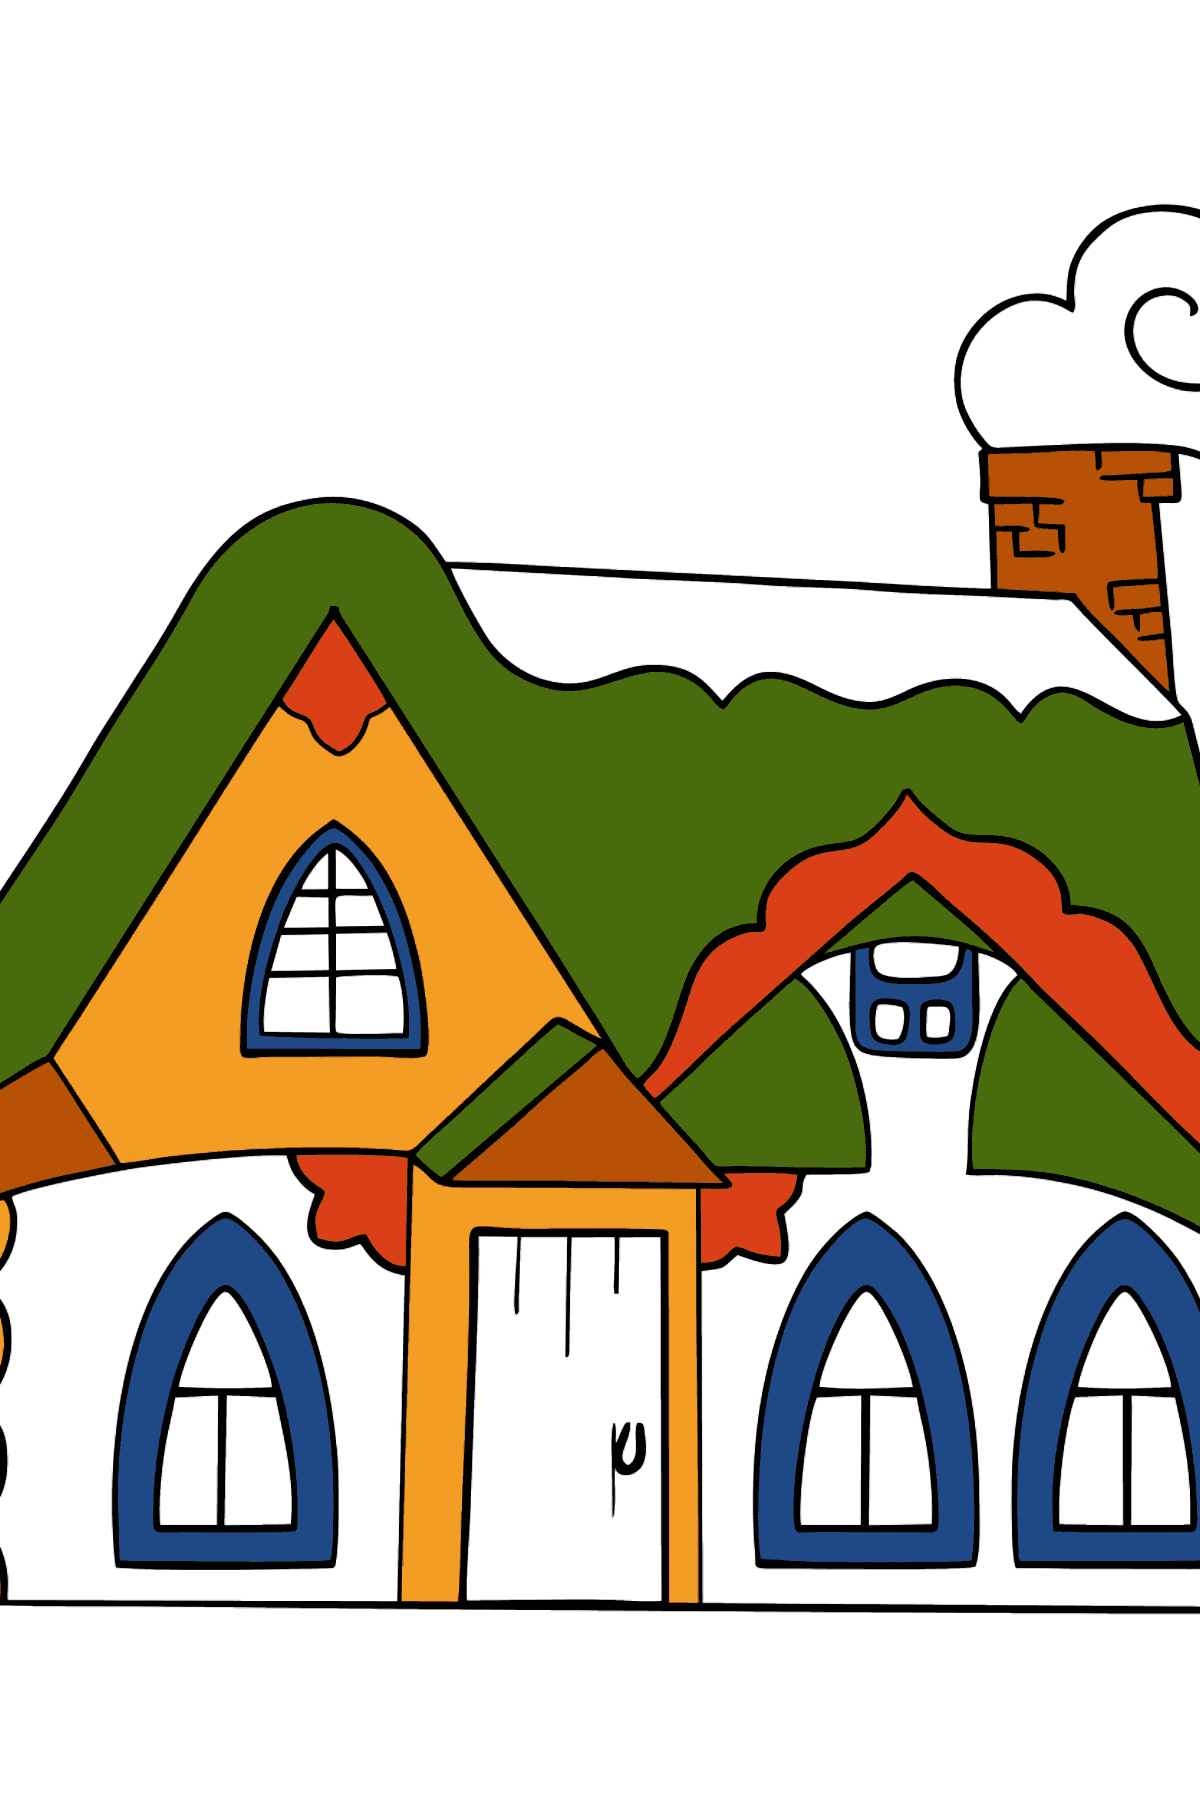 Coloring Page - A Fairytale House - Coloring Pages for Kids